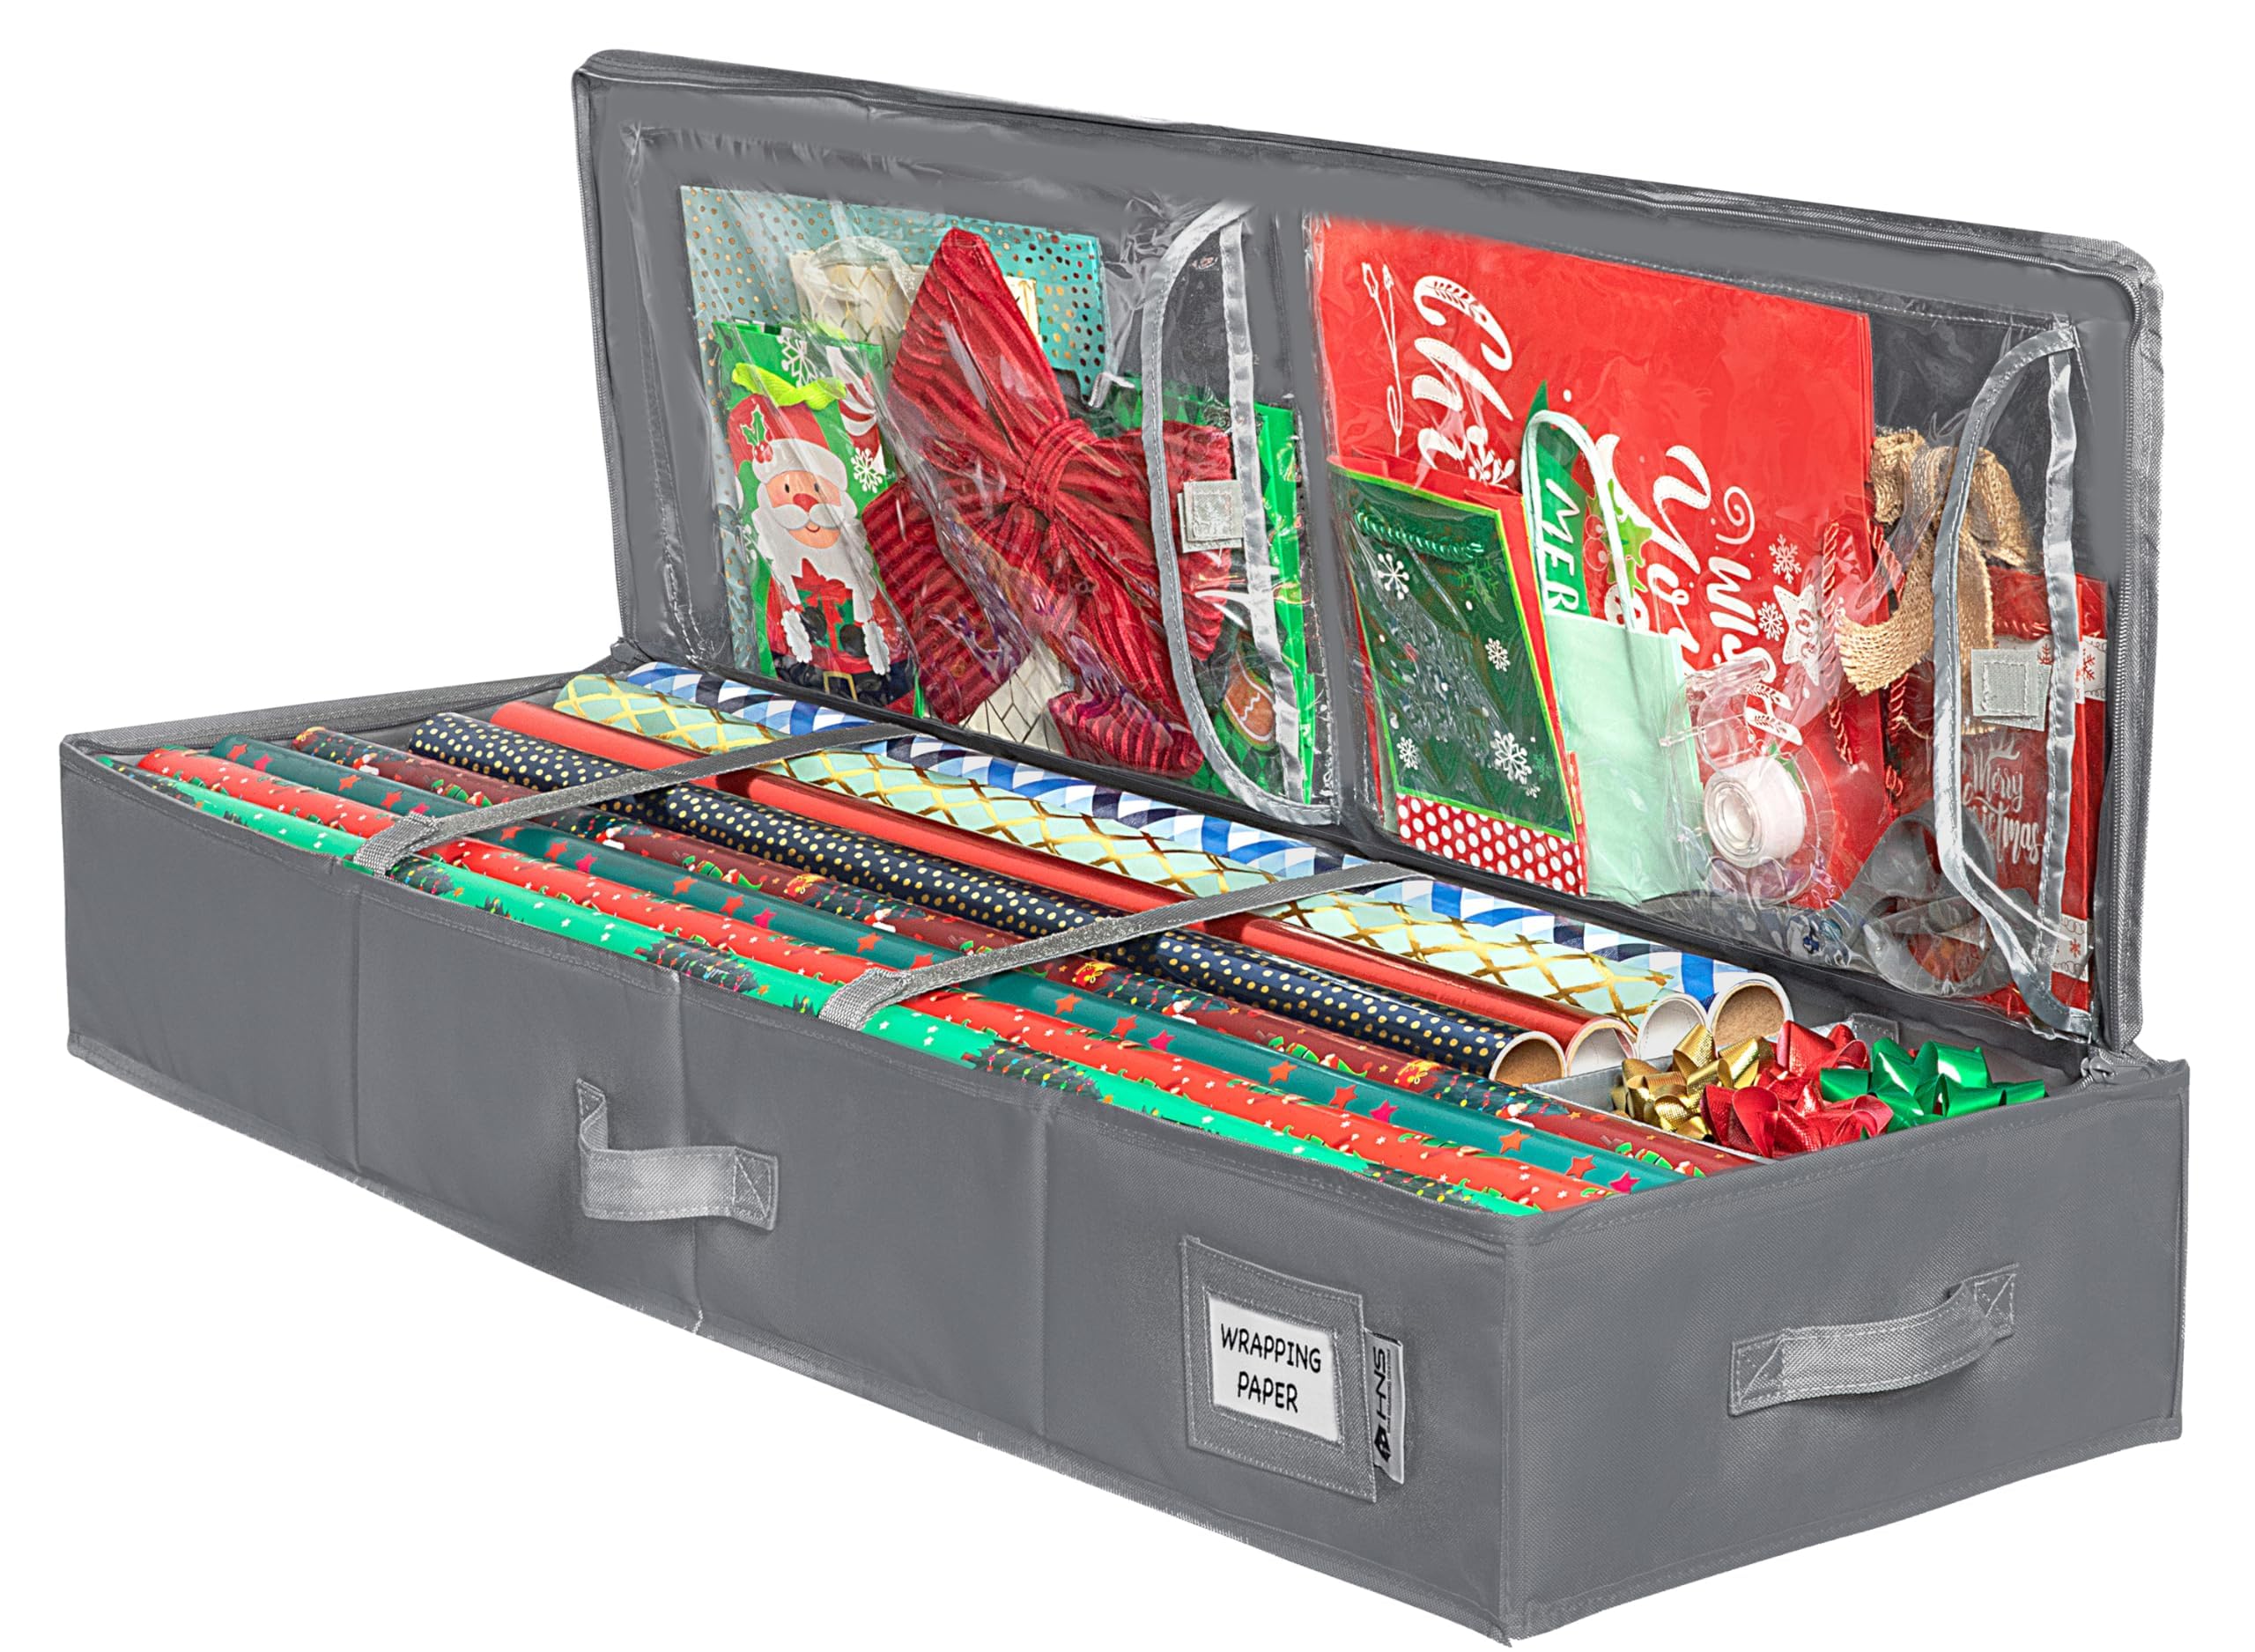 Christmas Storage Organizer - Wrapping Paper Storage and Under-Bed Storage Container for Holiday Storage of Gift Bags, Wrapping Paper, Ribbon, and Bows 600D  - Like New